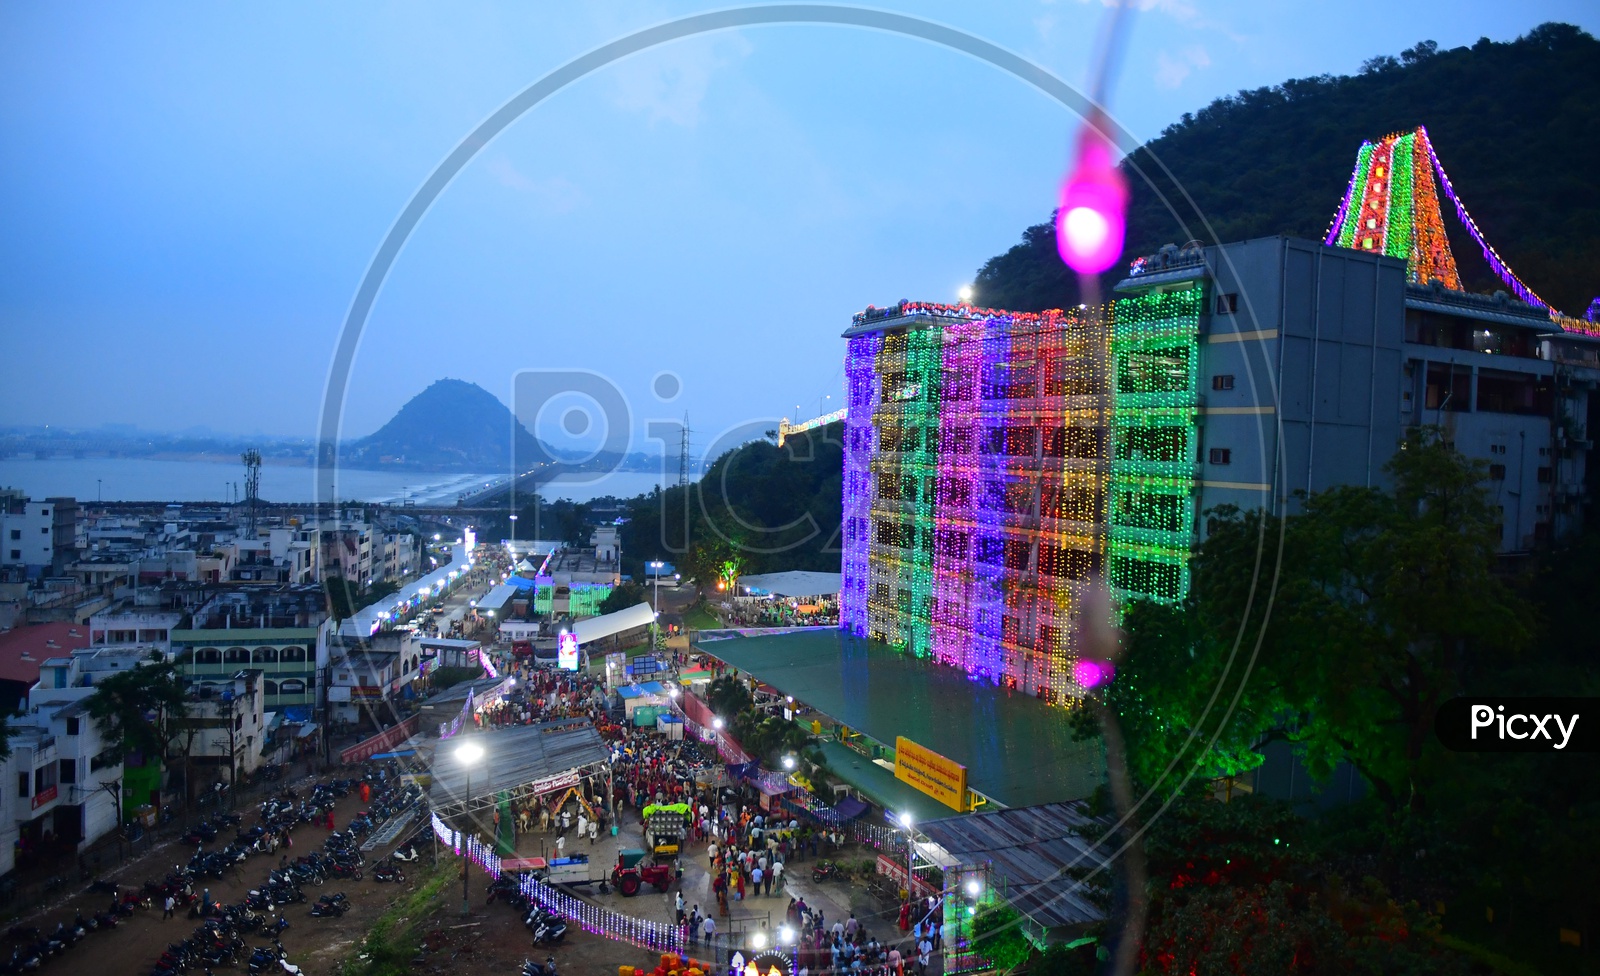 Aerial view of a Function hall with lights during Dussehra